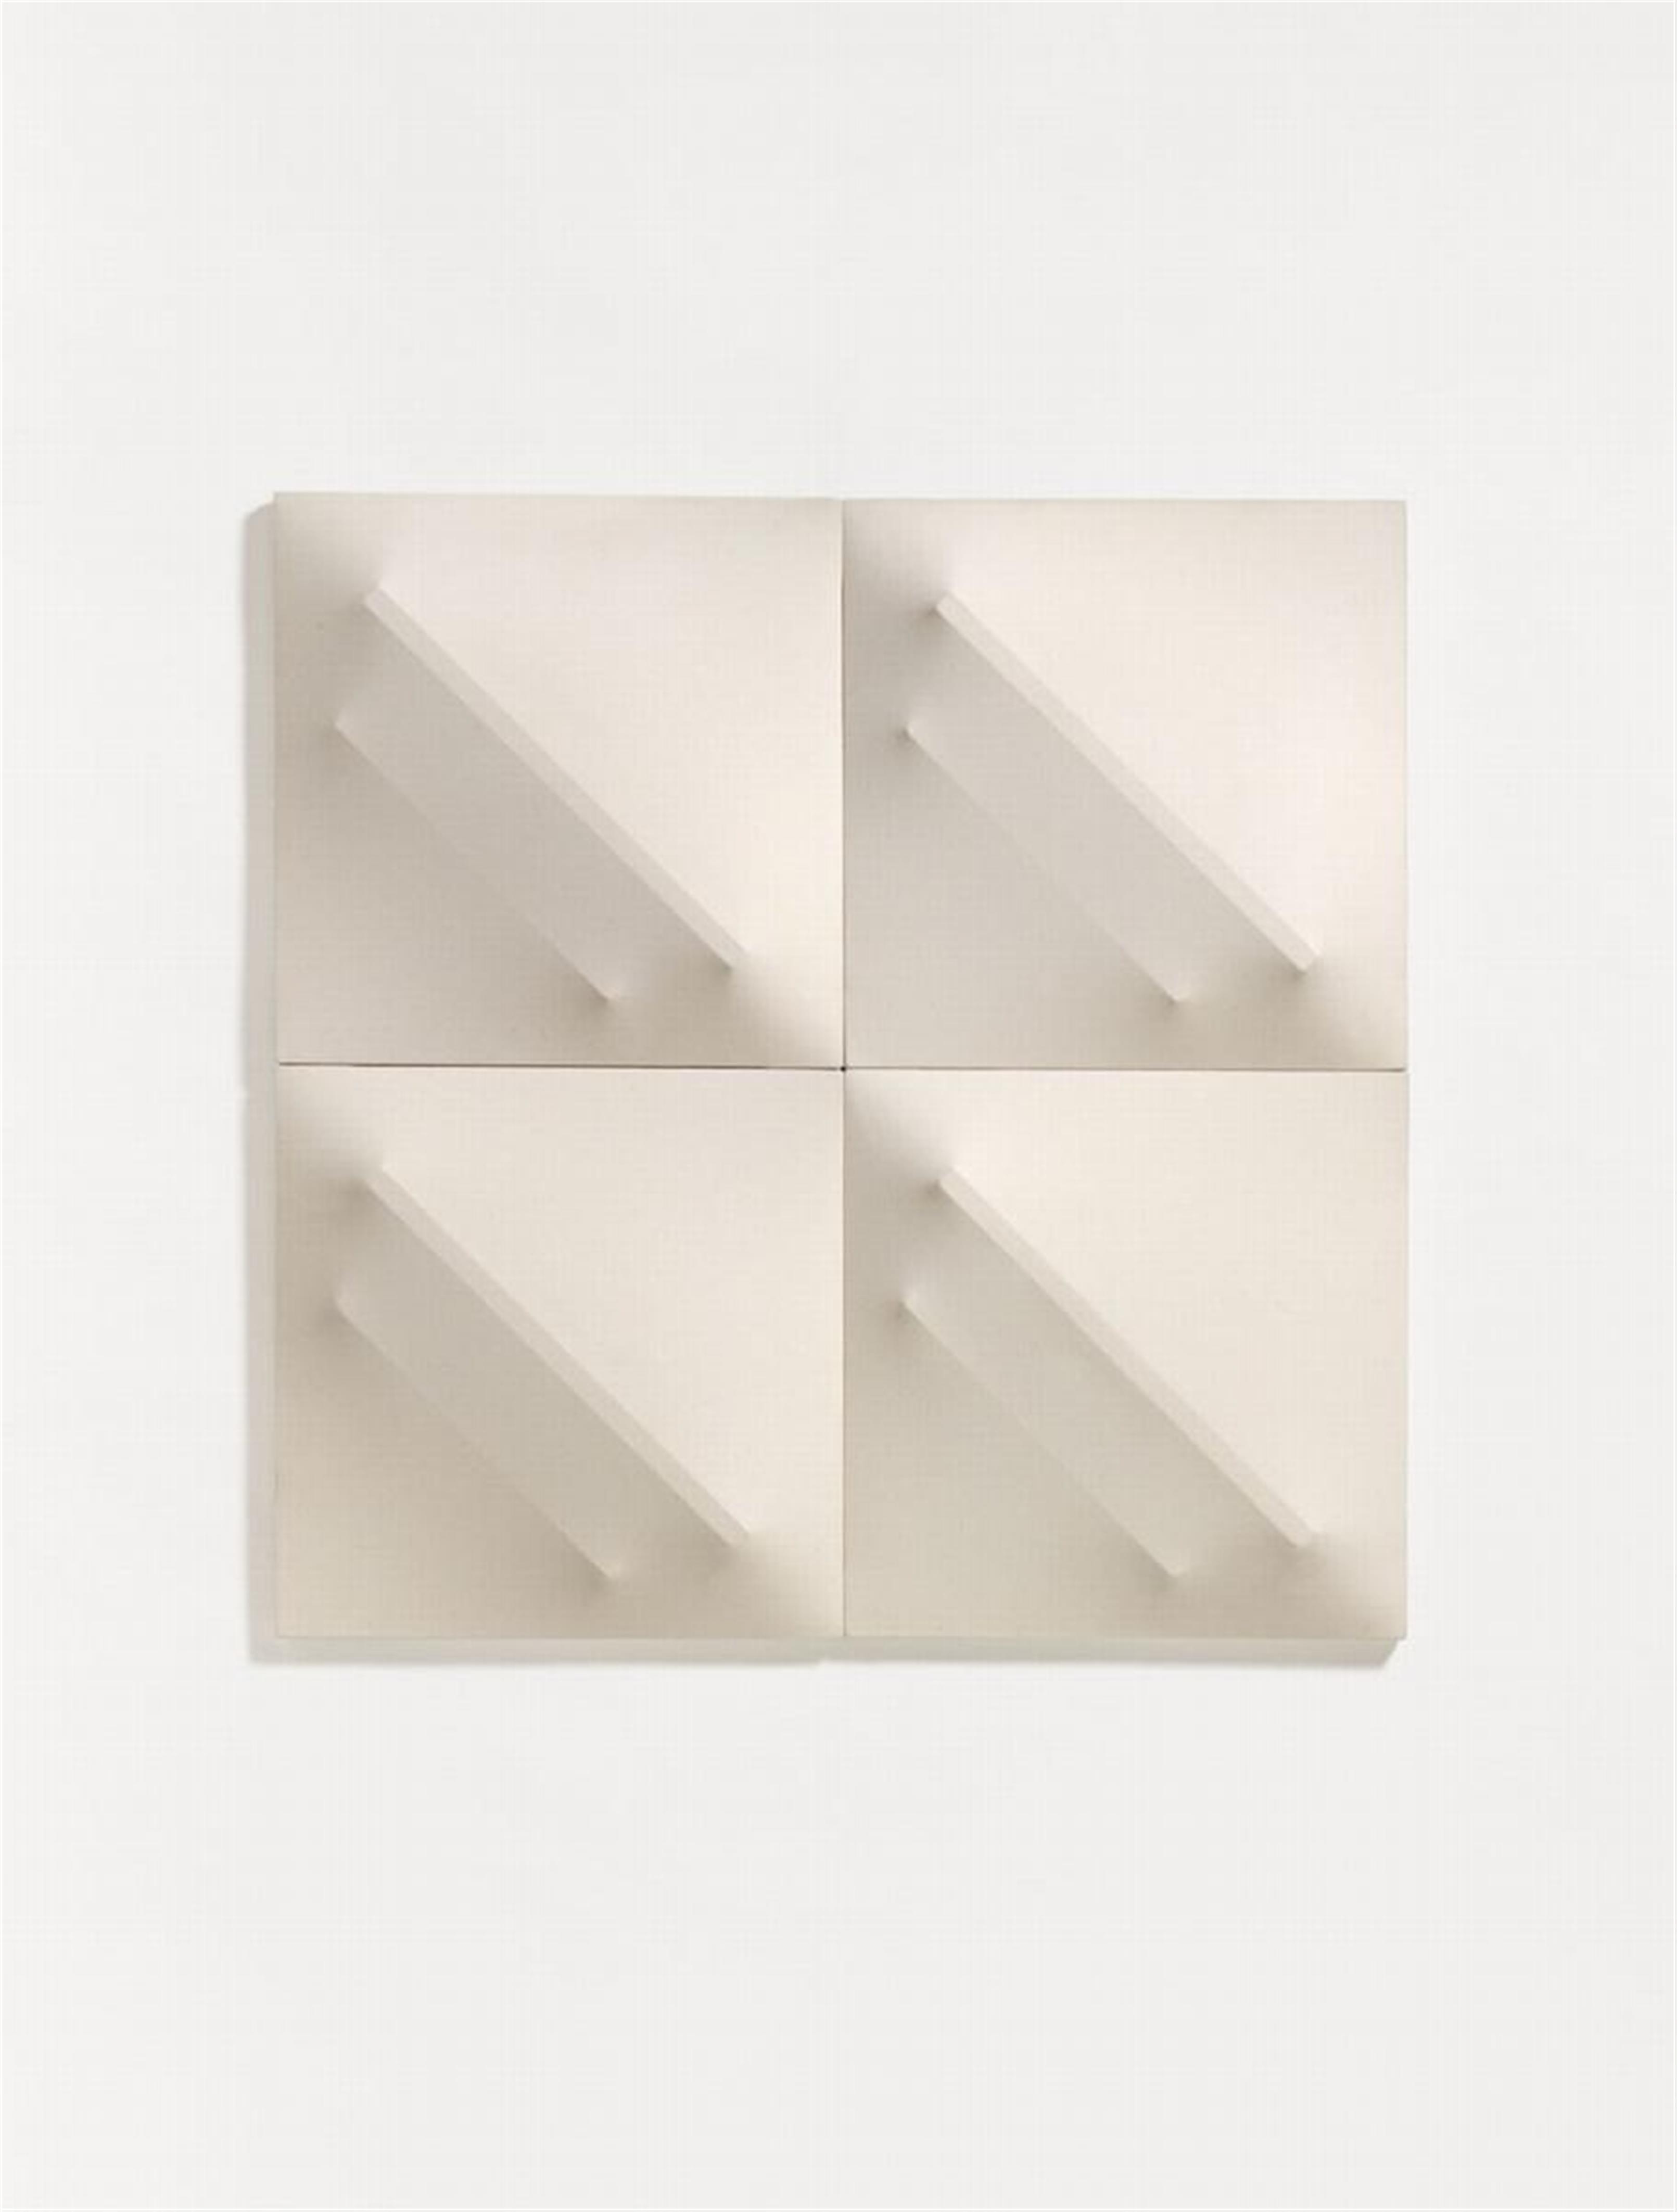 Michael Michaeledes - White Relief in 4 Pieces - image-1